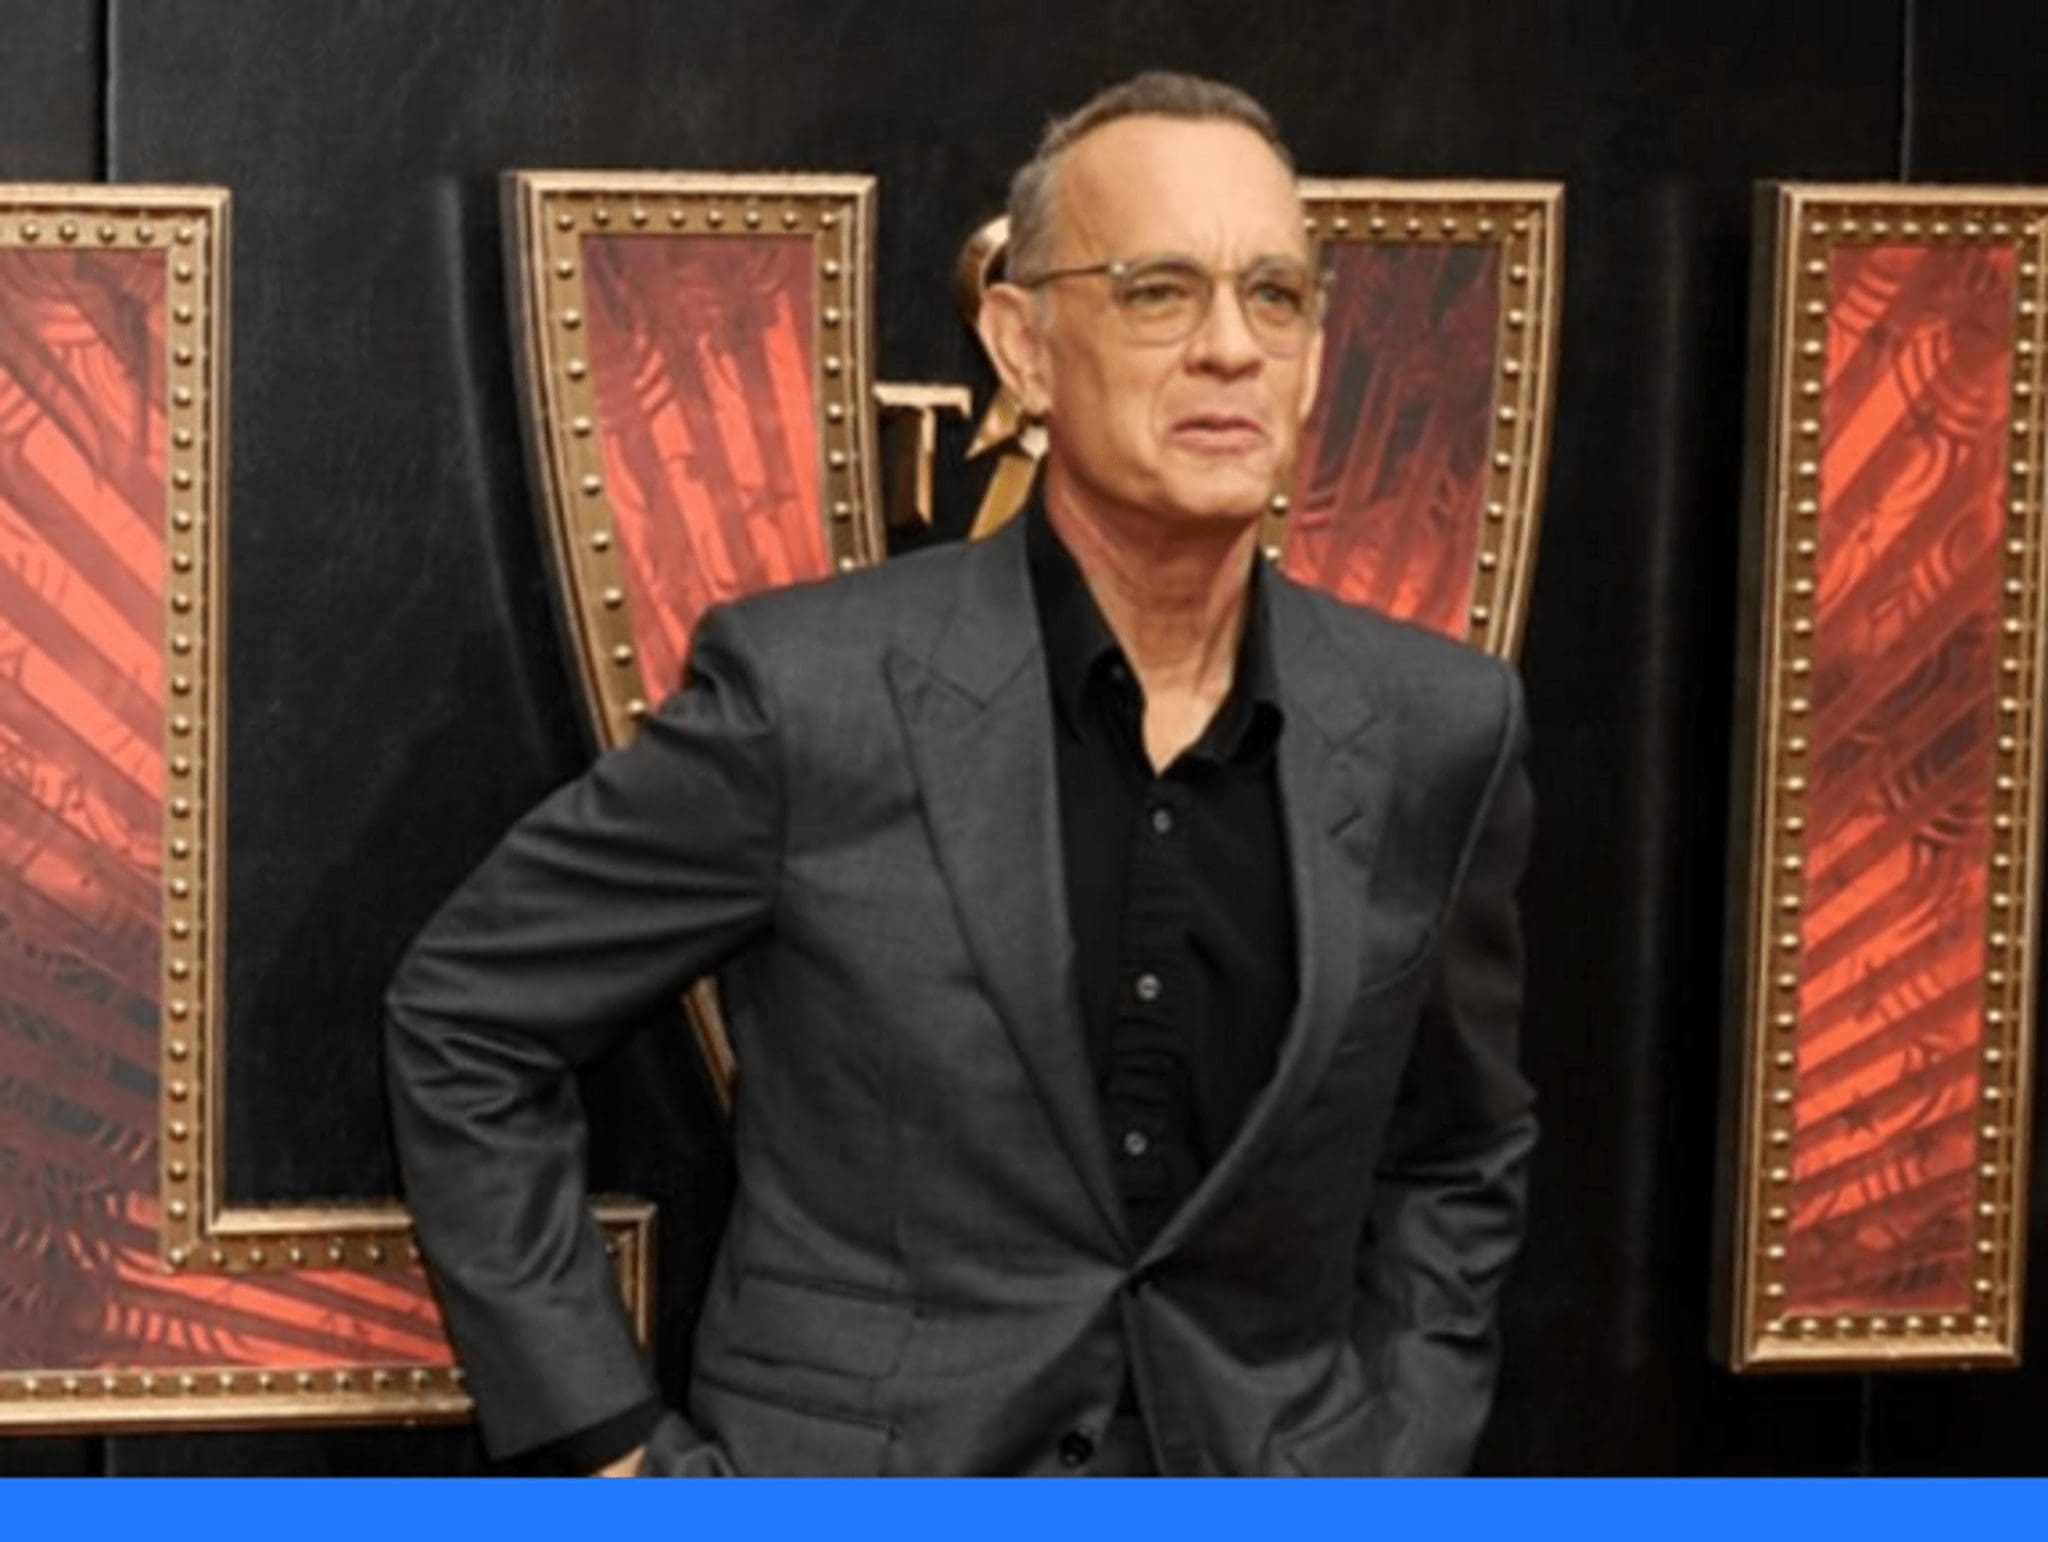 Tom Hanks' recent performance raised serious concerns about his health